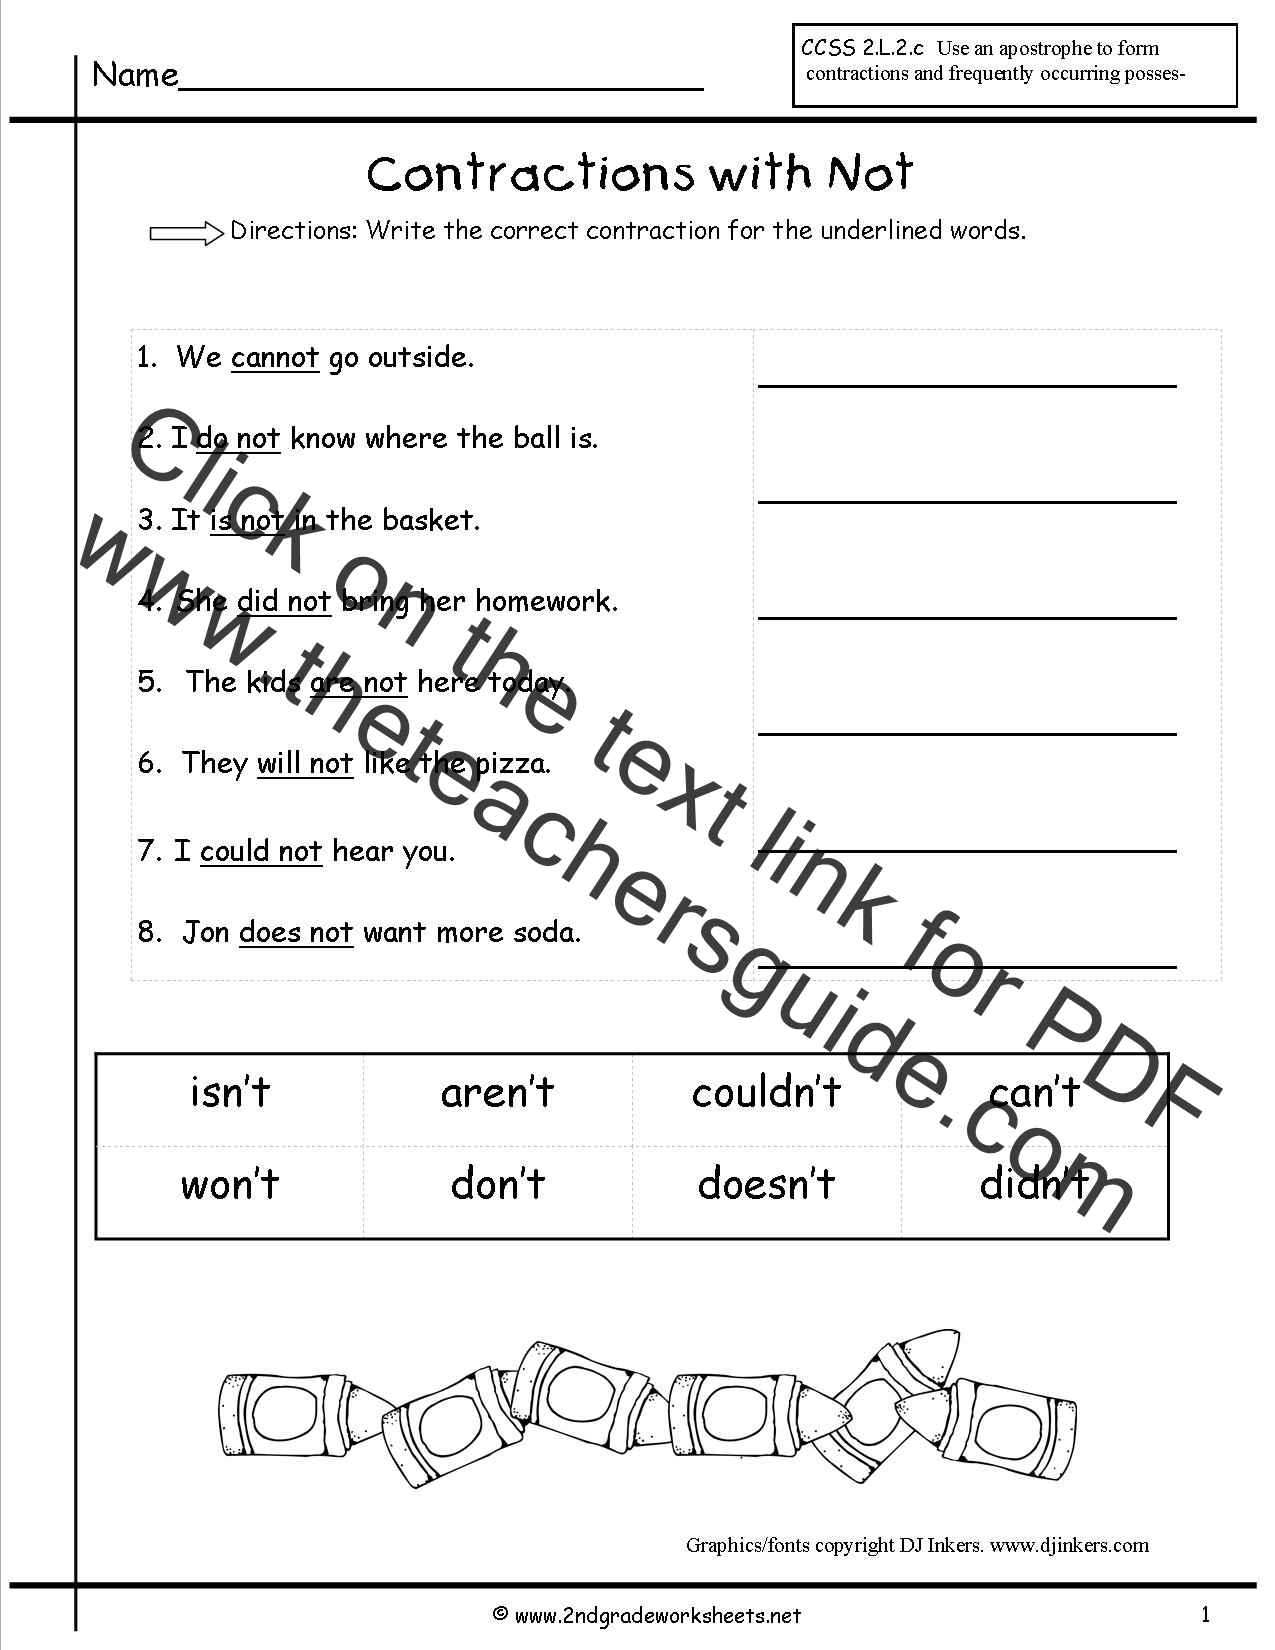 Free Contractions Worksheets and Printouts Intended For Contractions Worksheet 3rd Grade